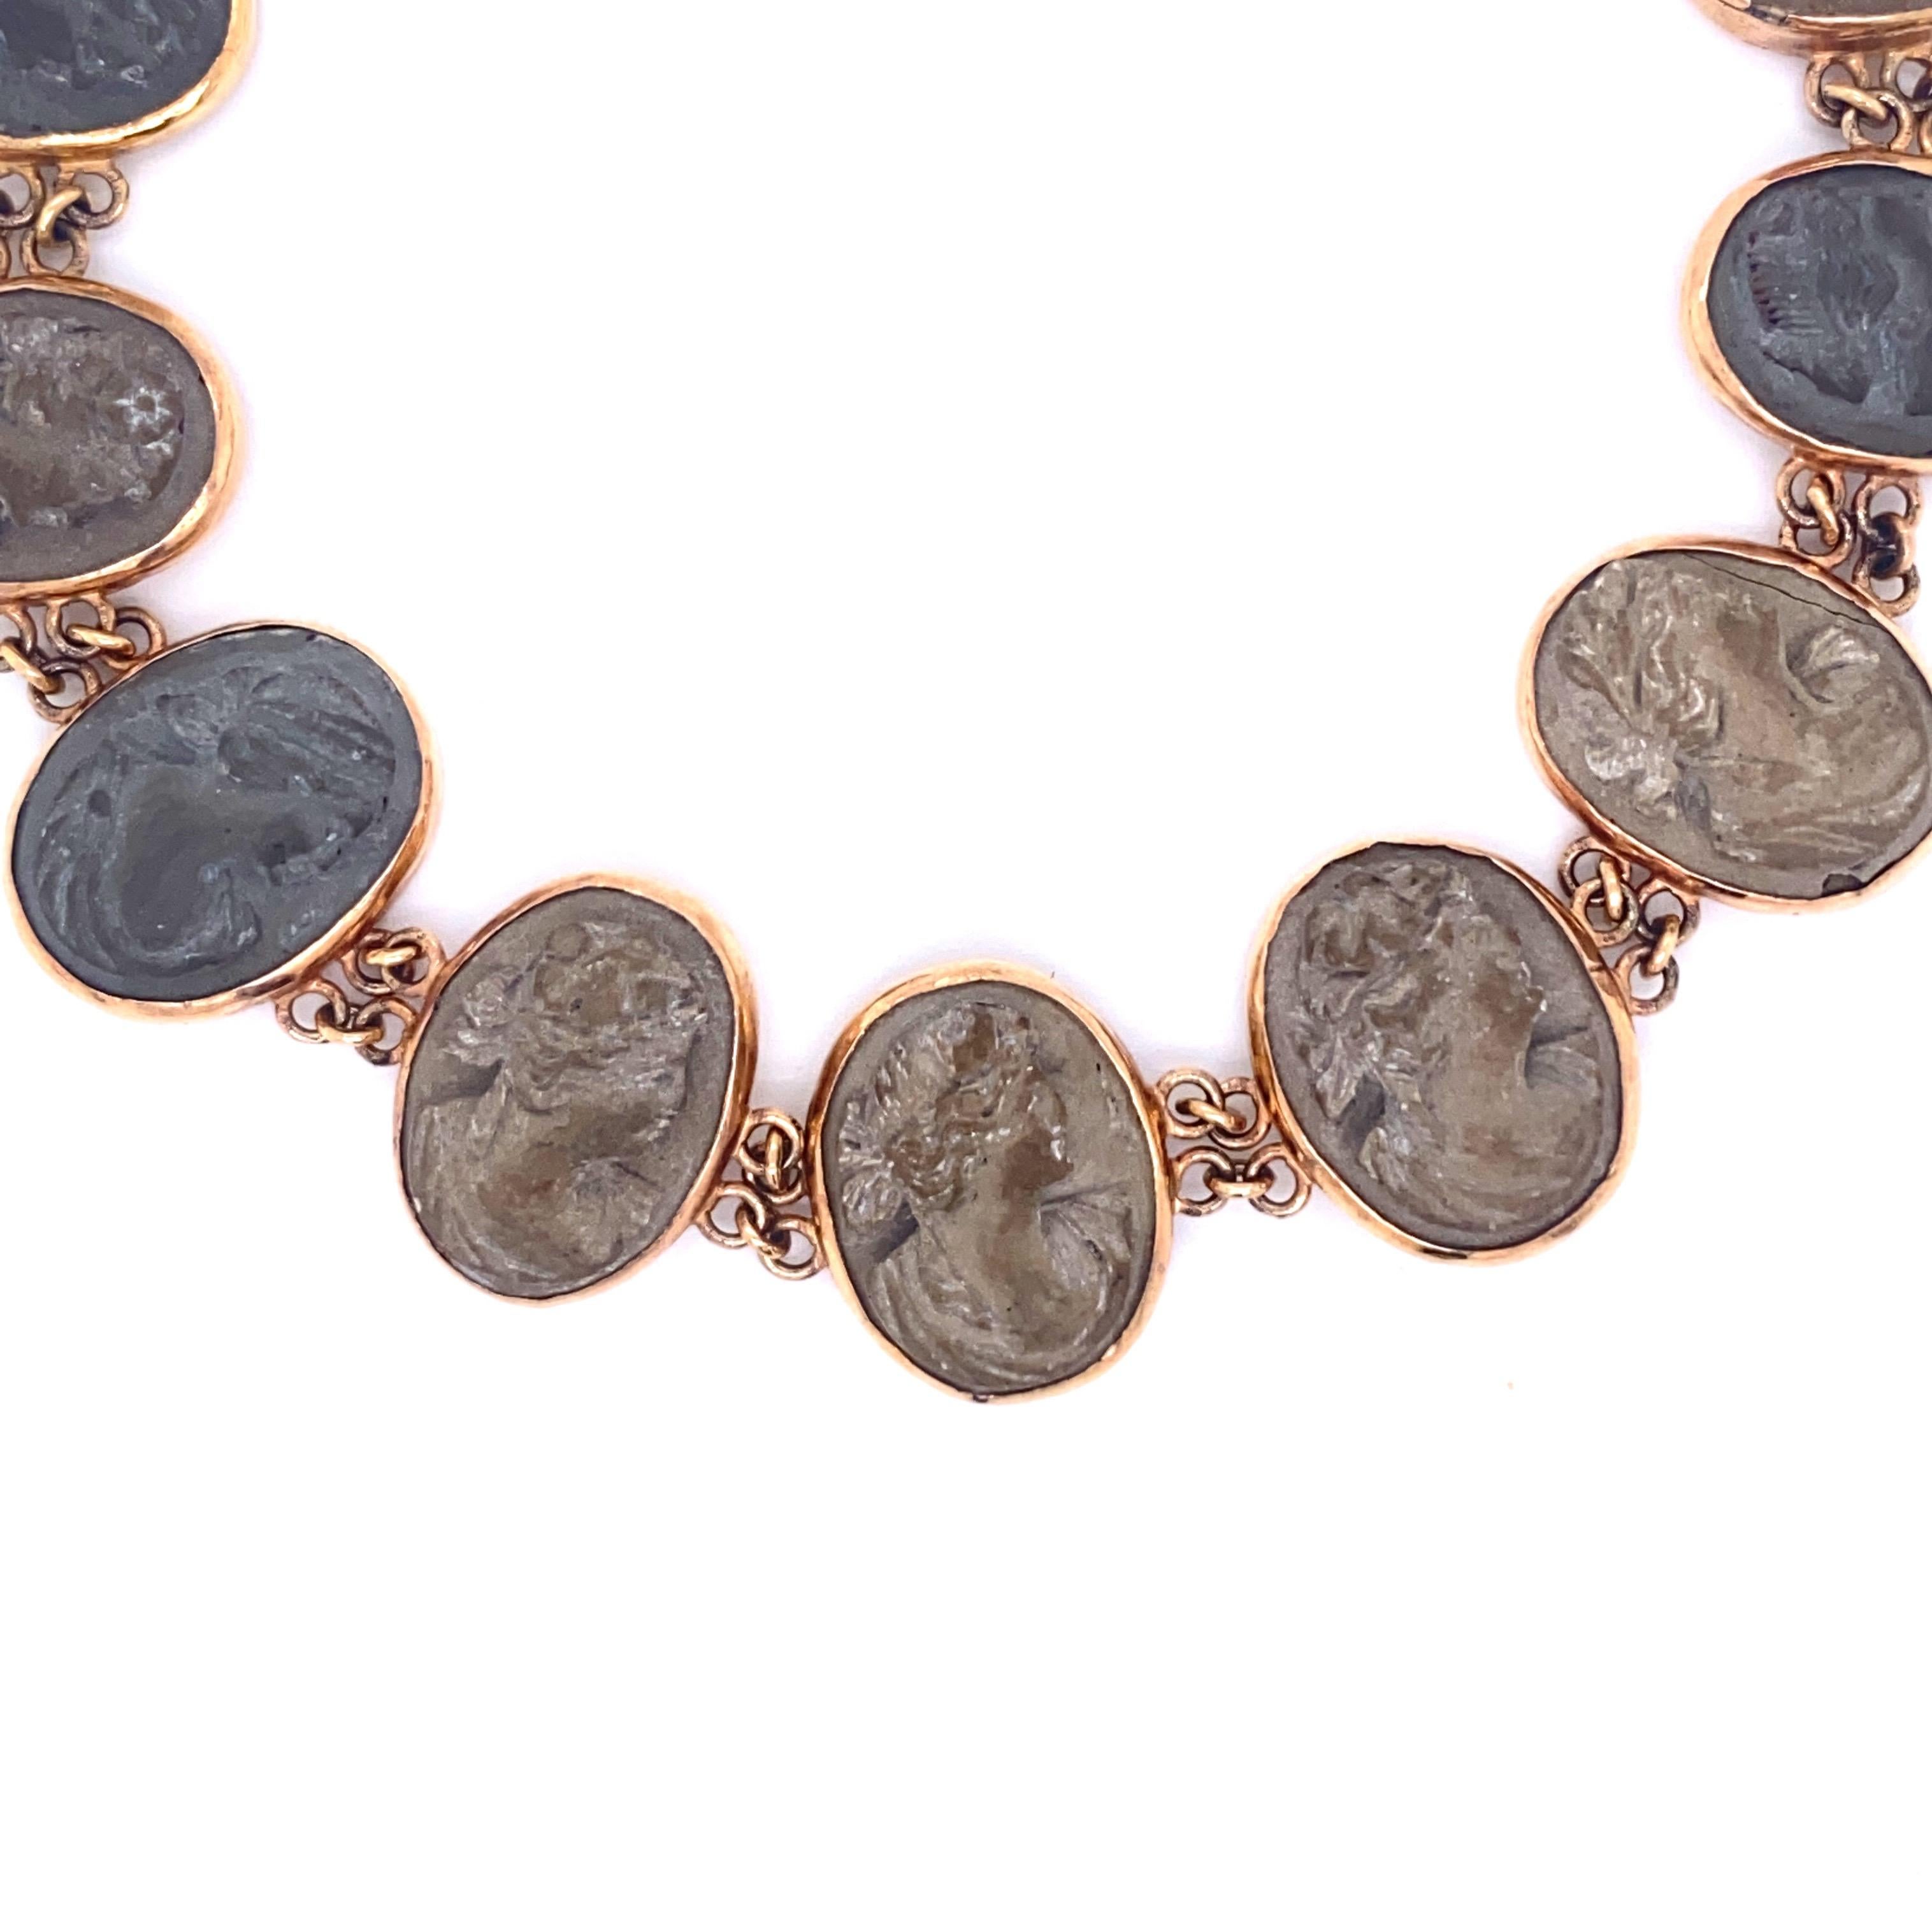 This wonderful lava bracelet was sold in Naples in the 1950's. Made by Pompeian stone cutters, each of the nine round heads of the bracelet is distinctly carved and is of a different hue and comes from a different organic material sourced from